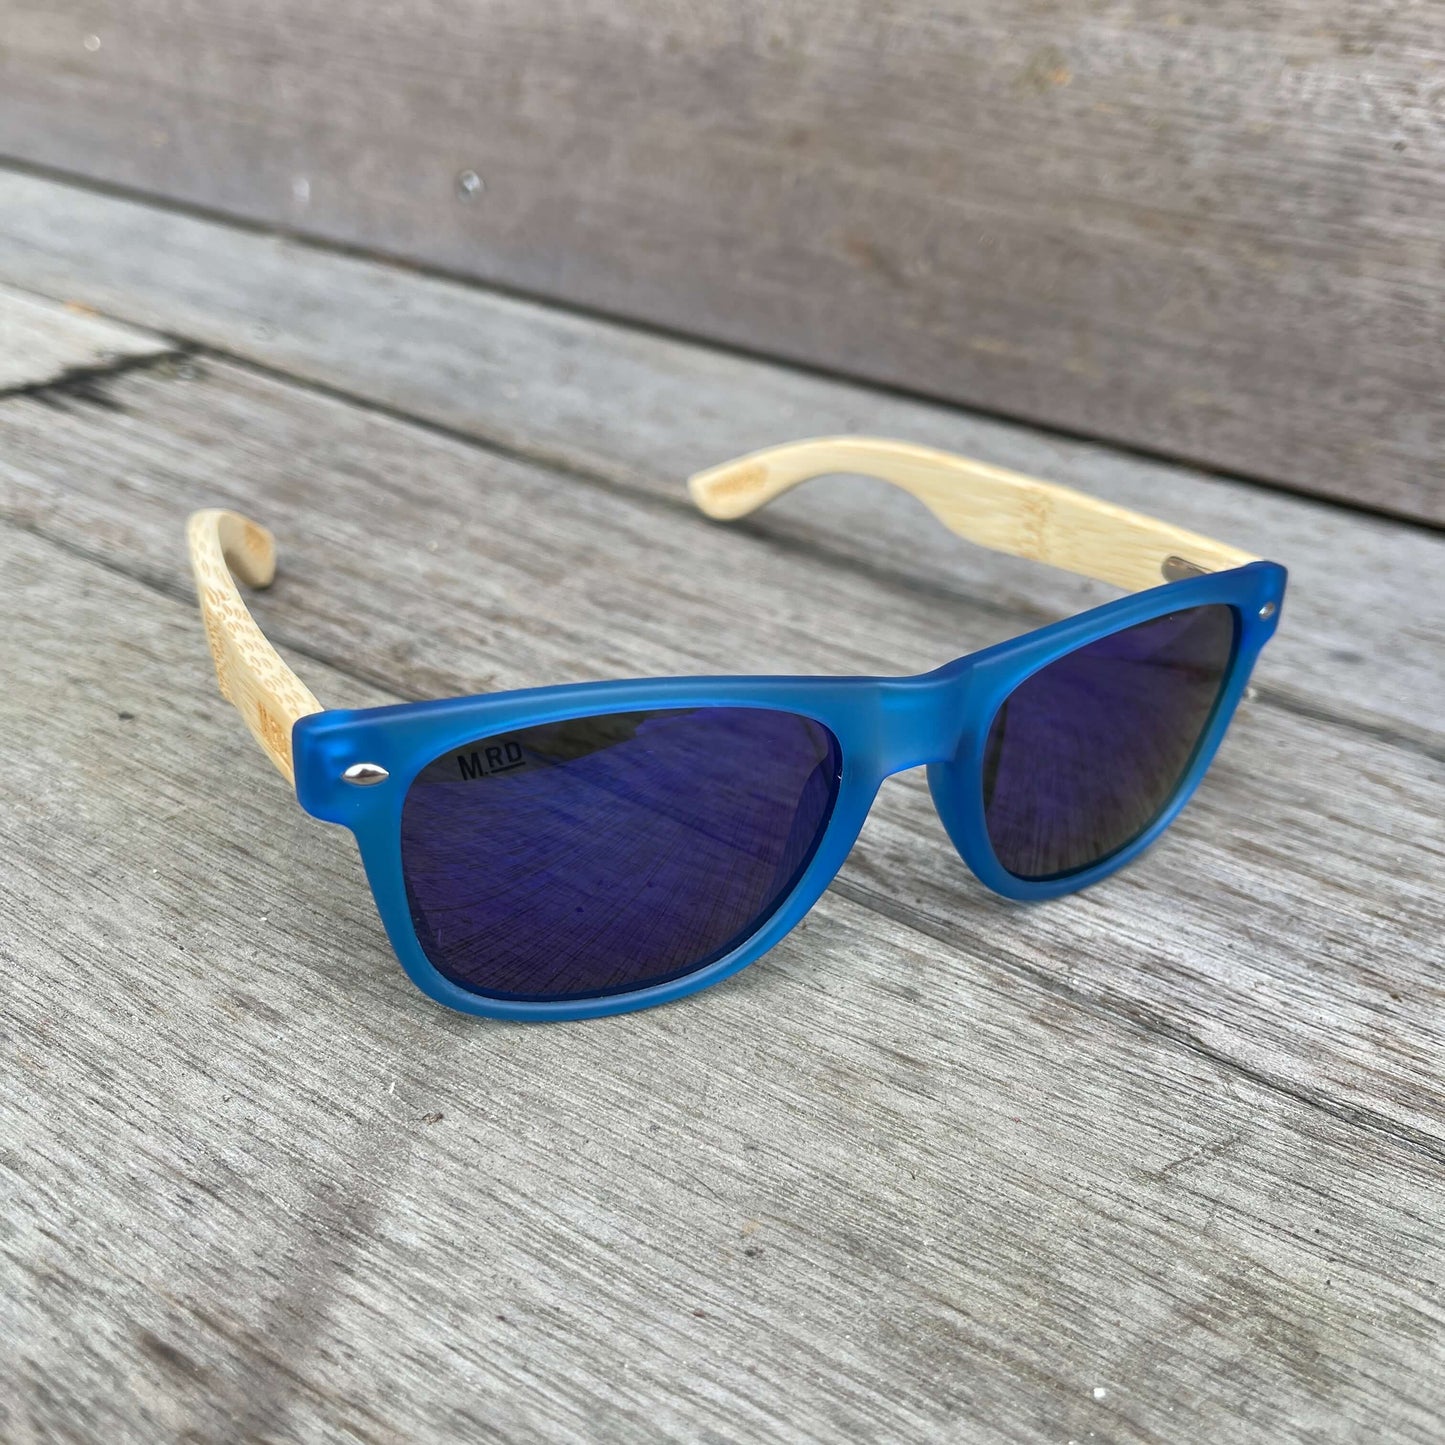 Sunglasses with wooden arms, blue frames and blue reflective lenses.